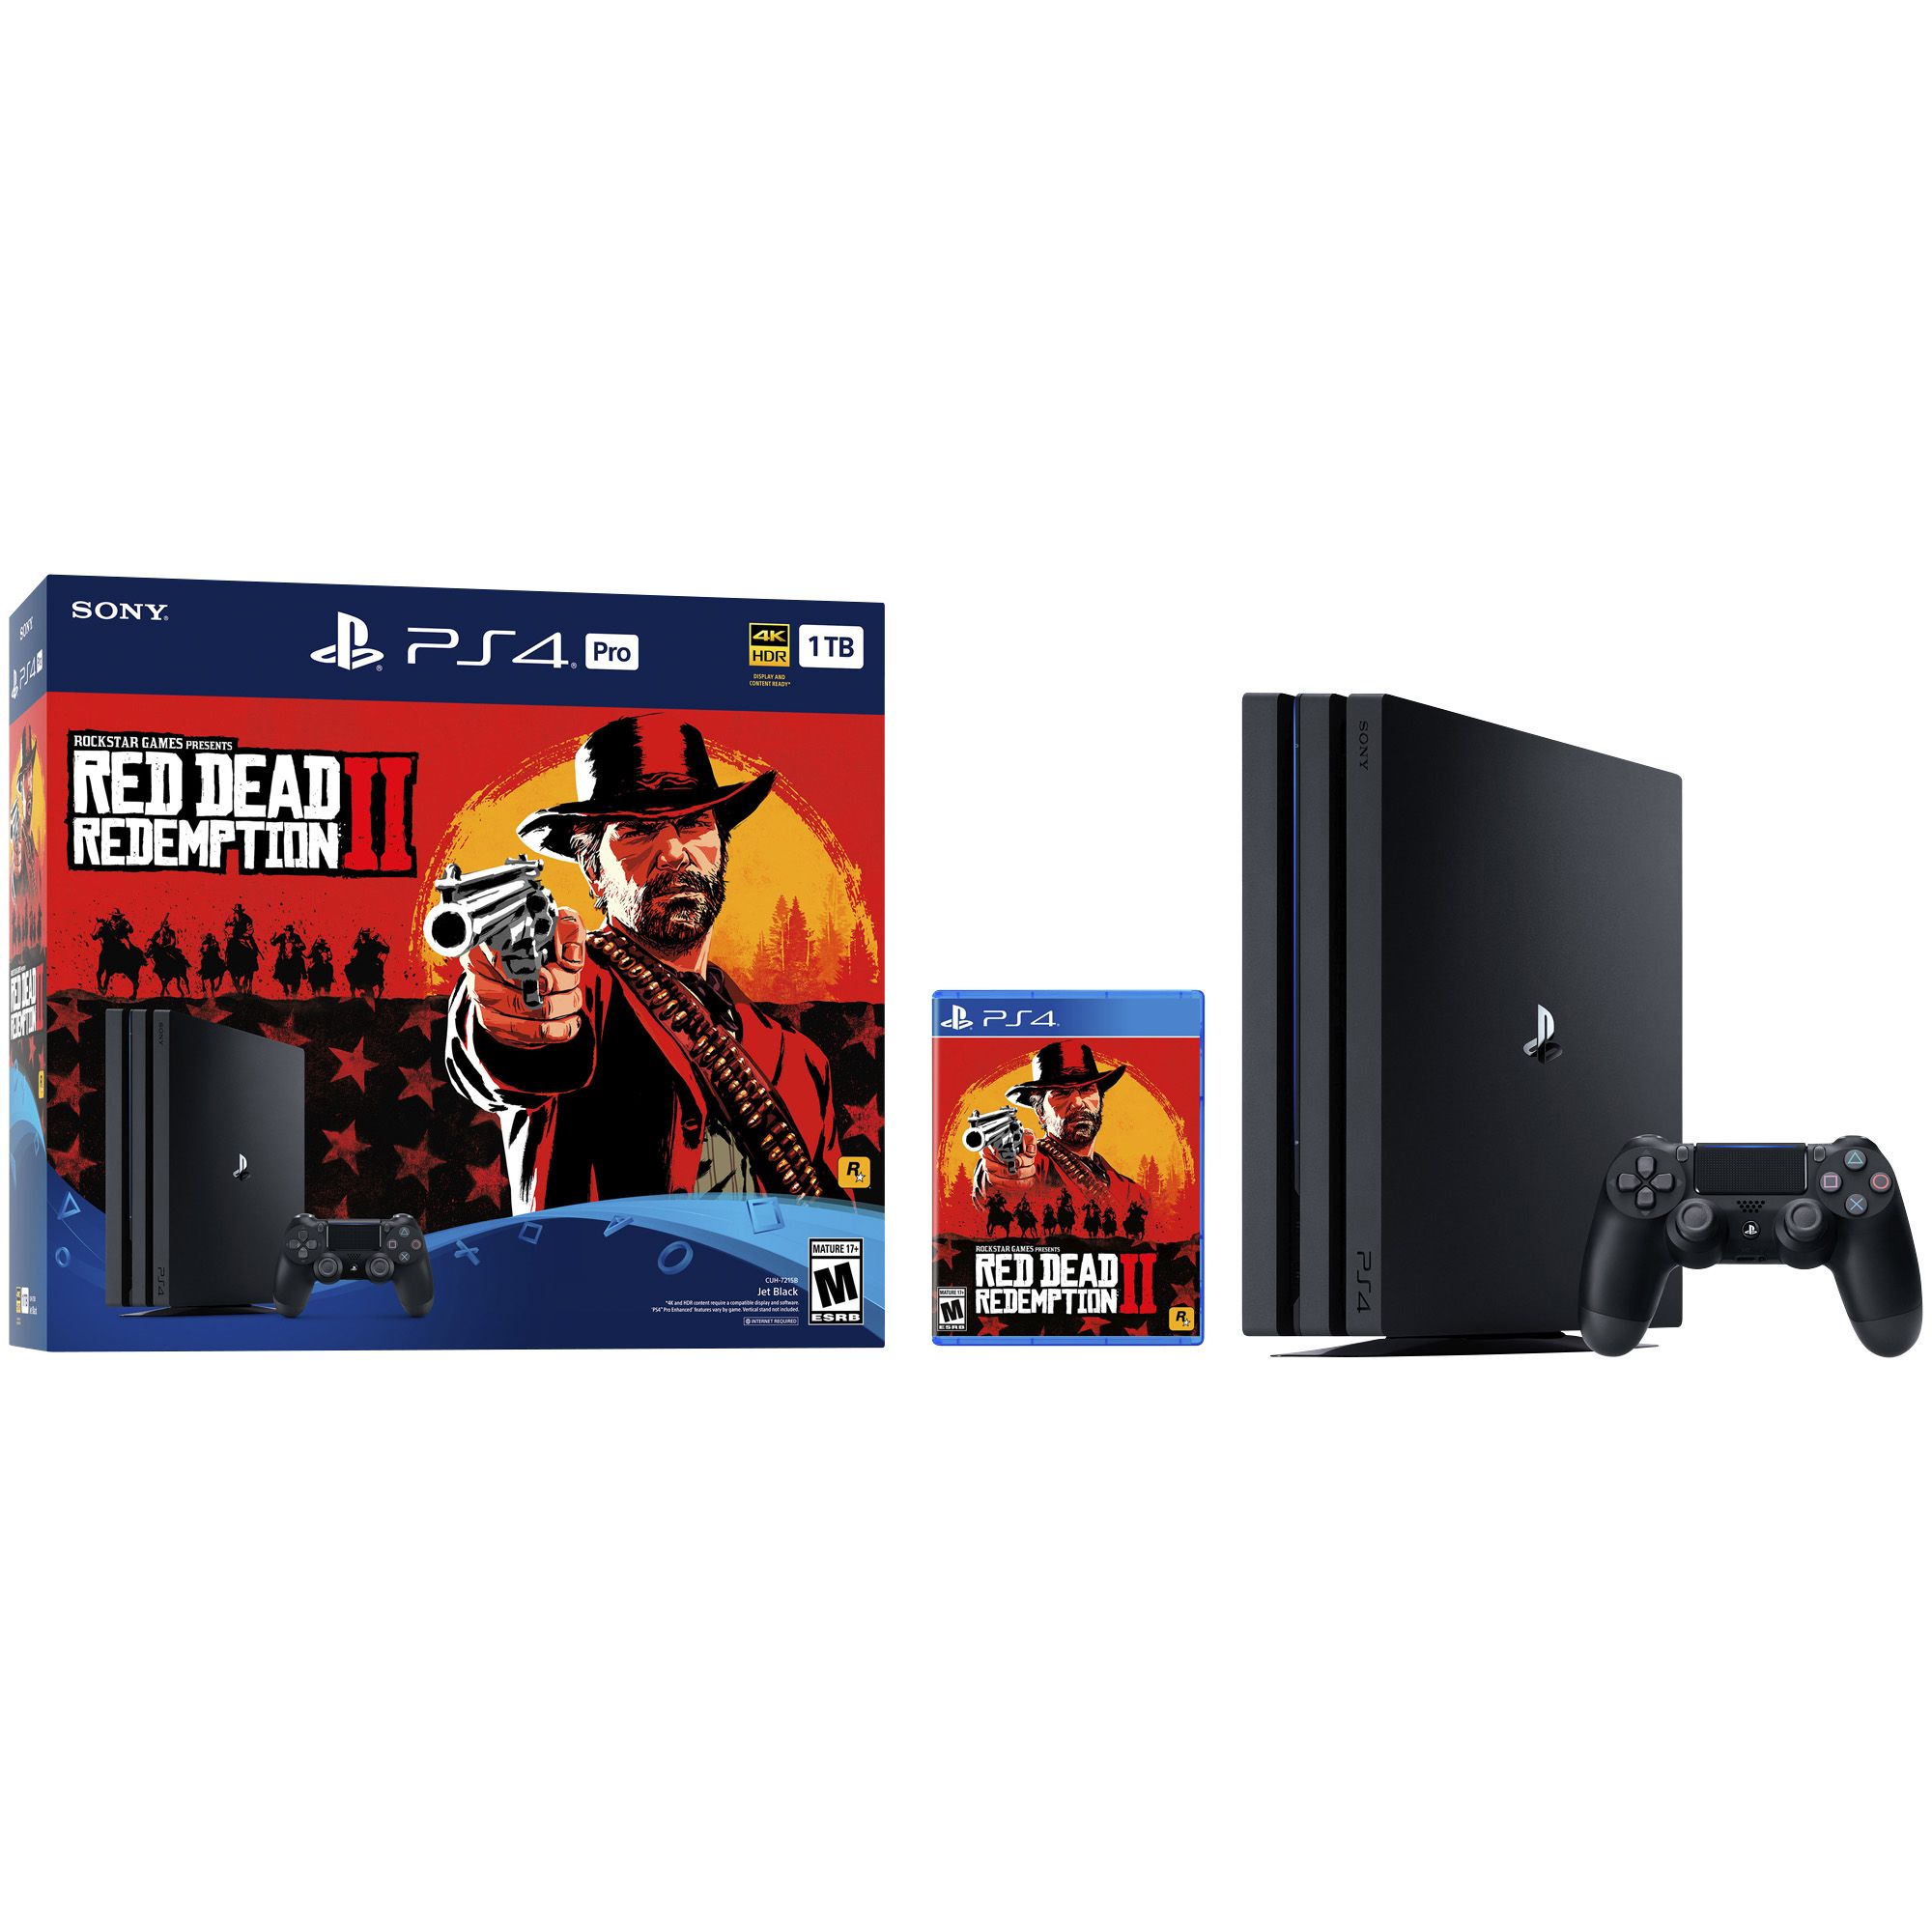 Sony PS4 Pro 1TB Console Bundle with Red Dead Redemption 2